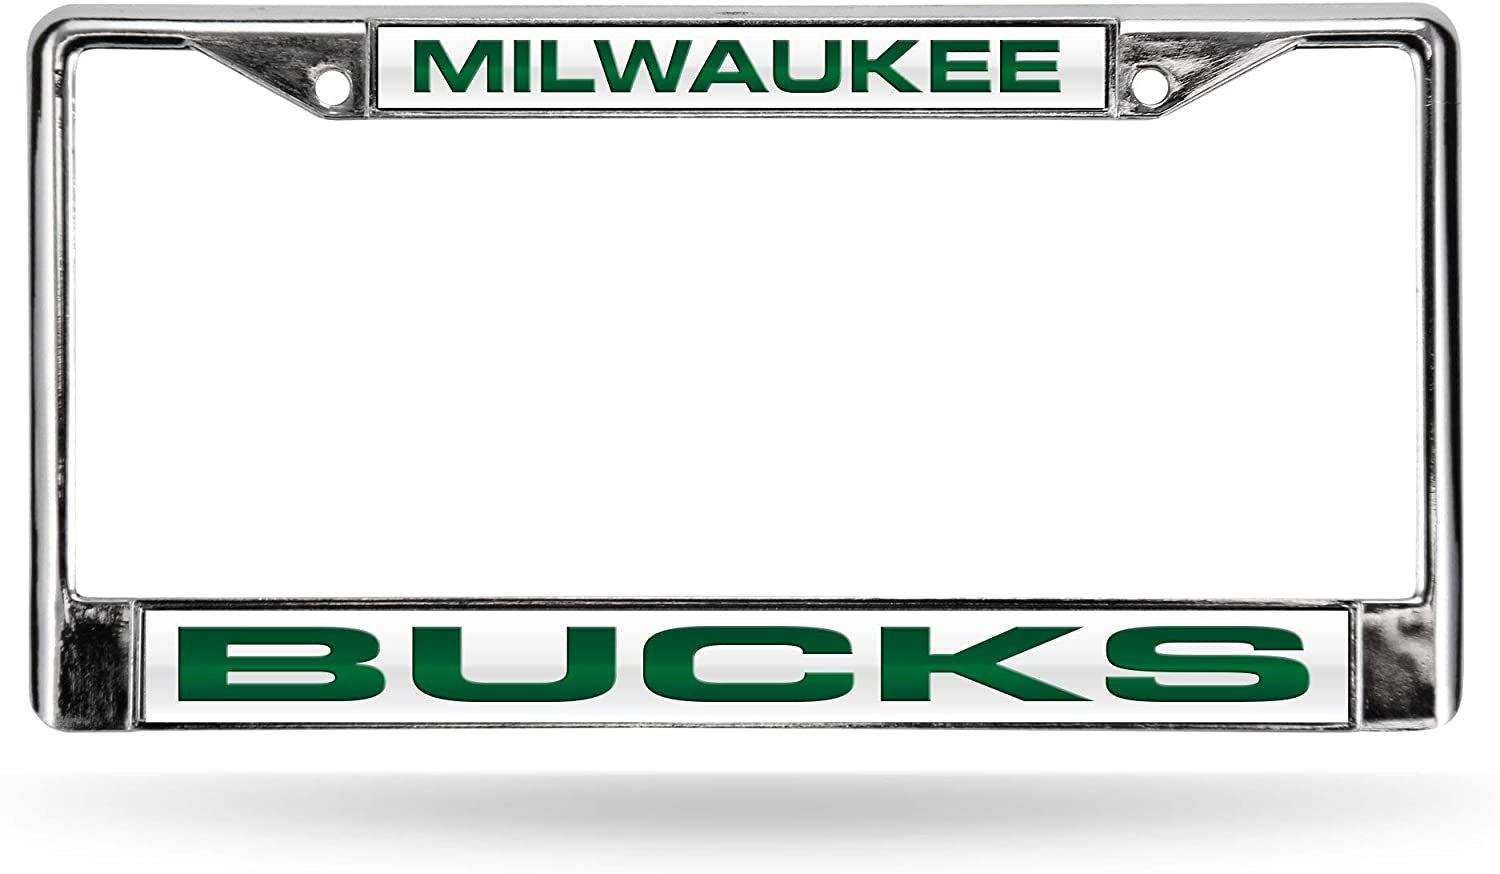 Milwaukee Bucks Chrome Metal License Plate Frame Tag Cover, Laser Acrylic Mirrored Inserts, 12x6 Inch